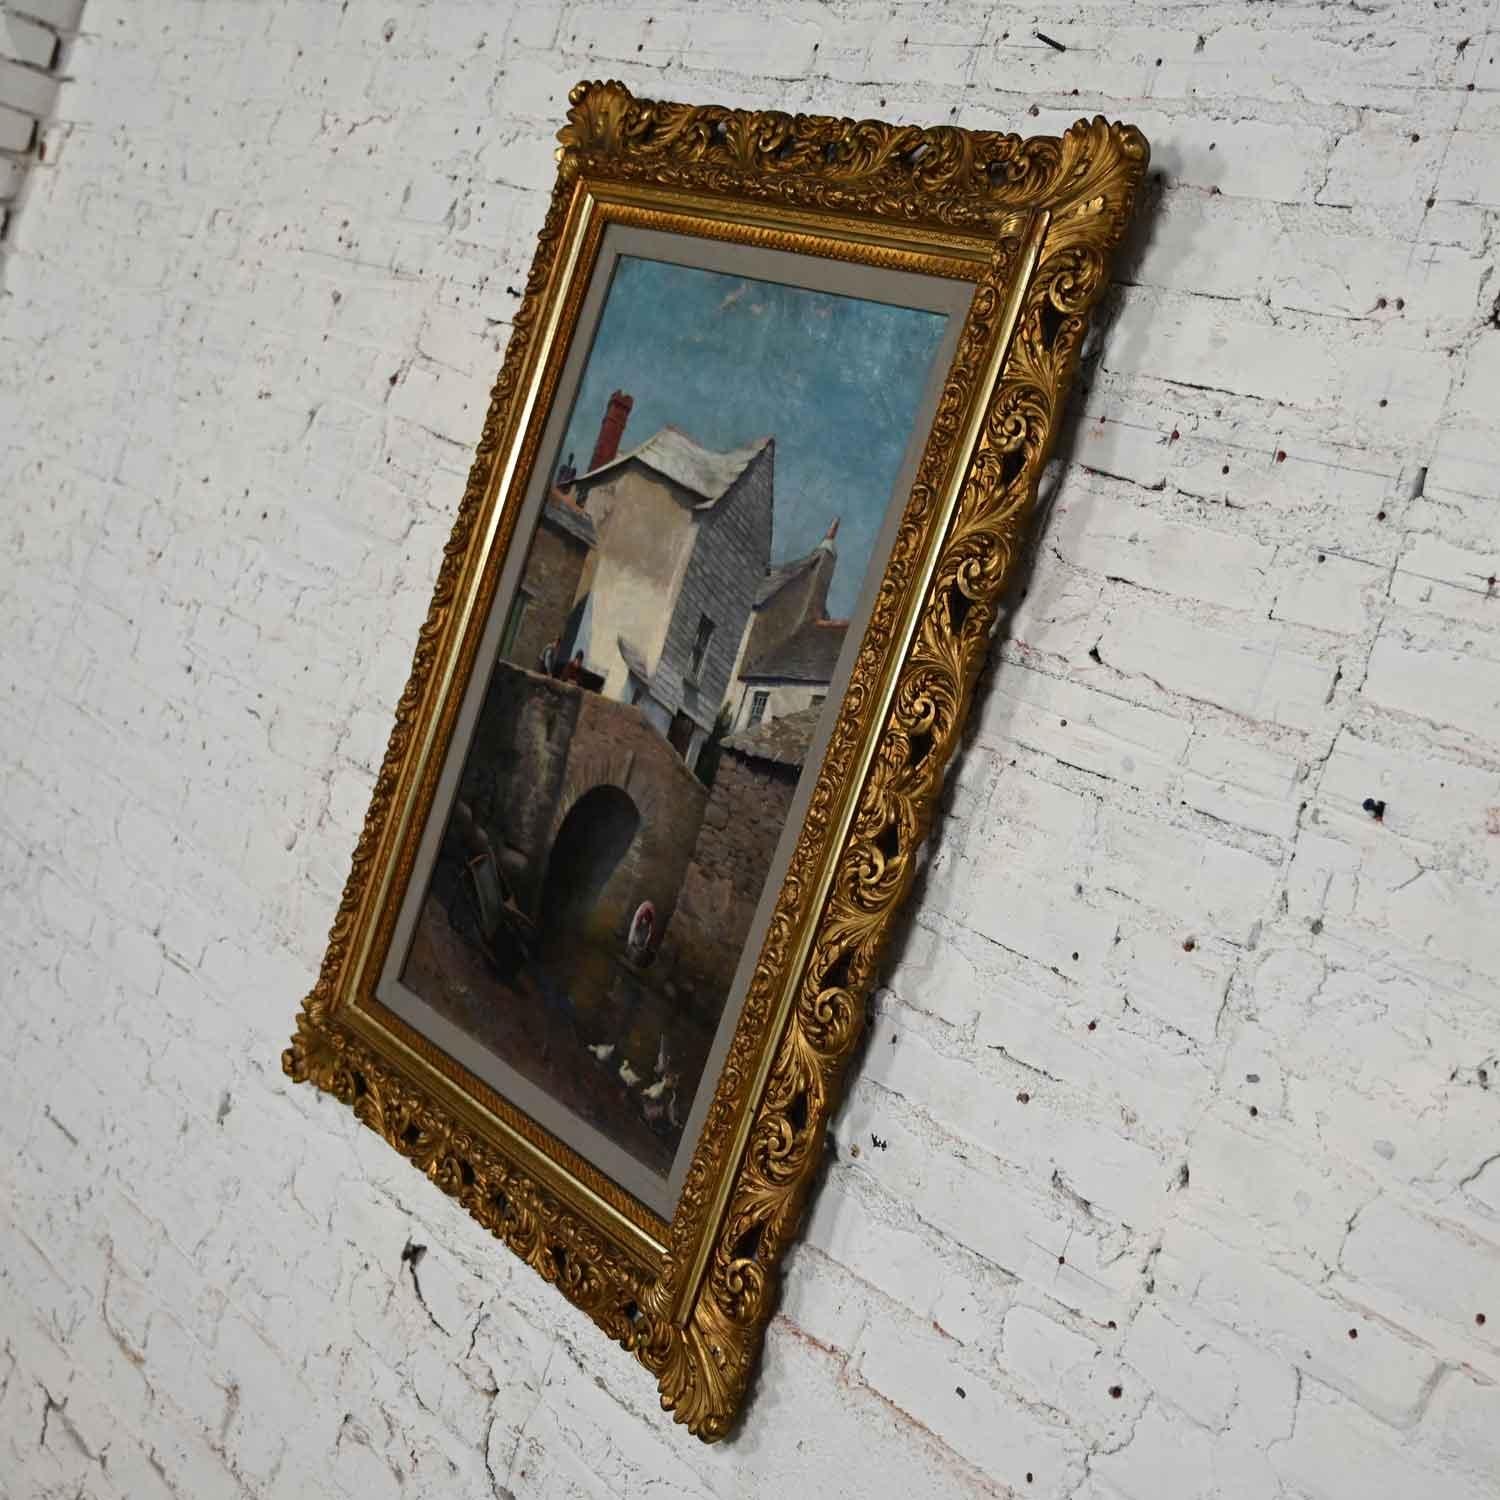 1896 Realism Landscape Oil Painting of Polperro by Hely Smith Orig Gilded Frame In Good Condition For Sale In Topeka, KS